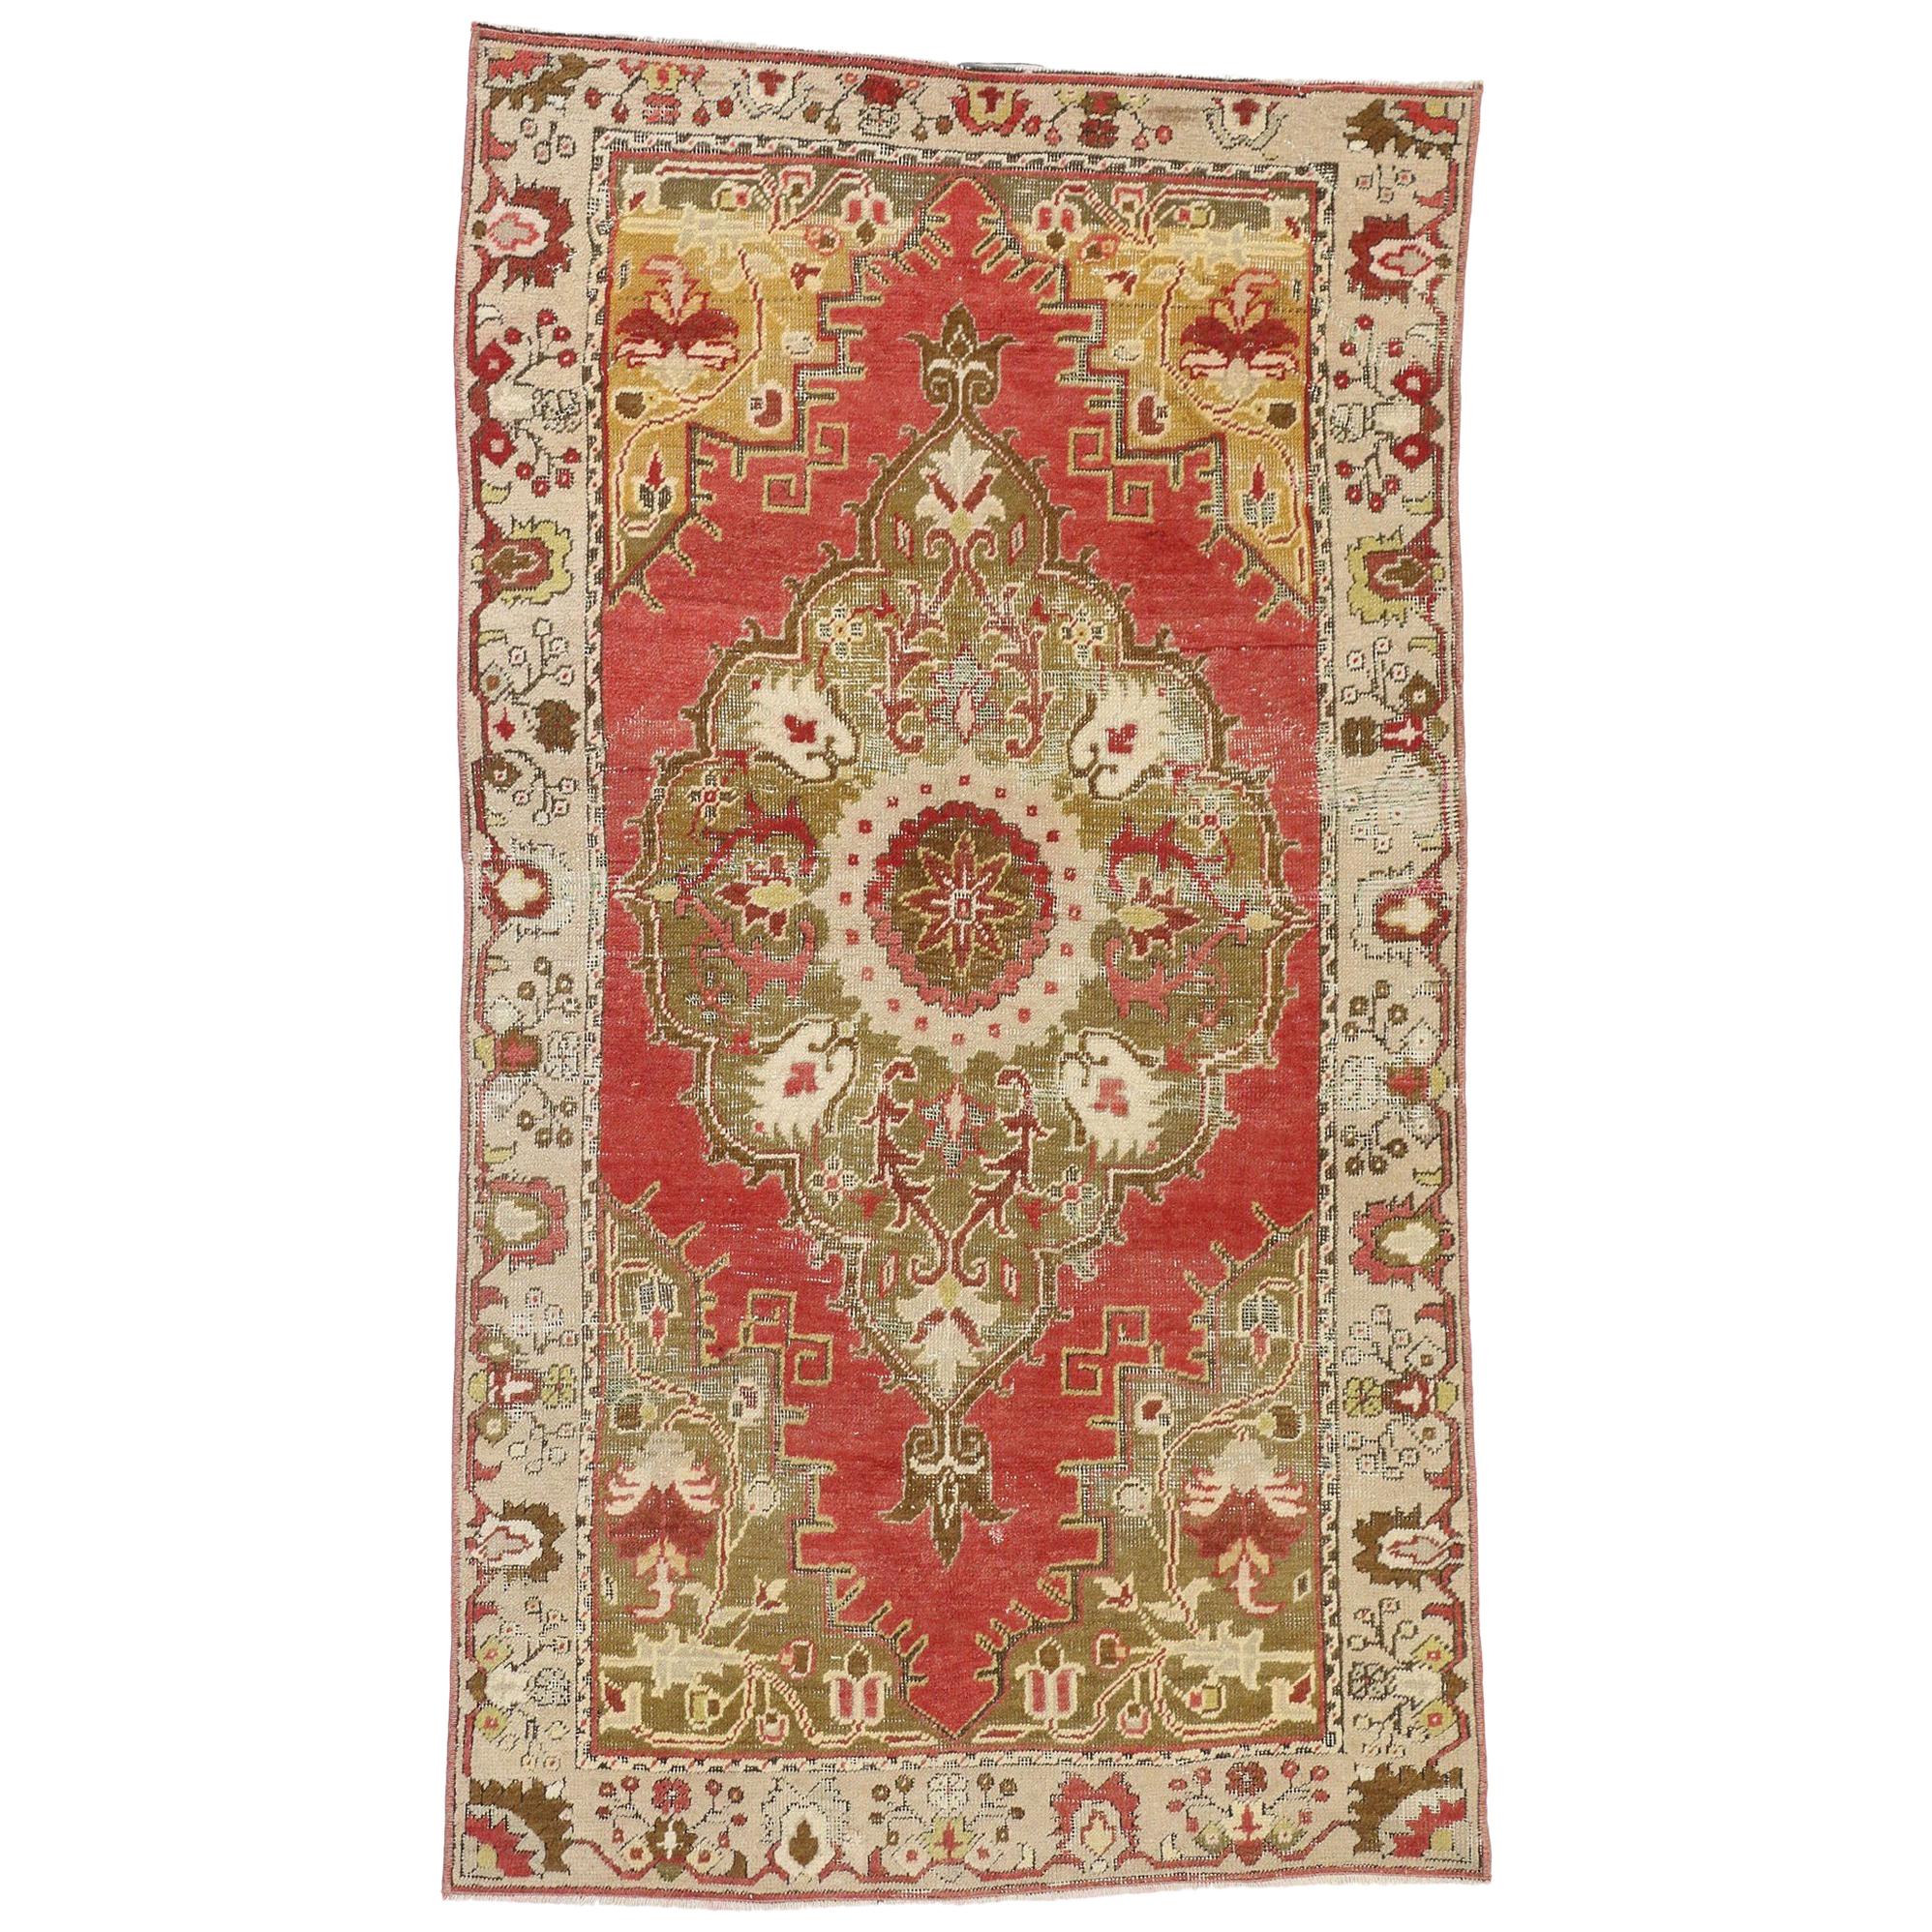 Rustic Rococo Style Distressed Vintage Turkish Oushak Rug, Entry or Foyer Rug